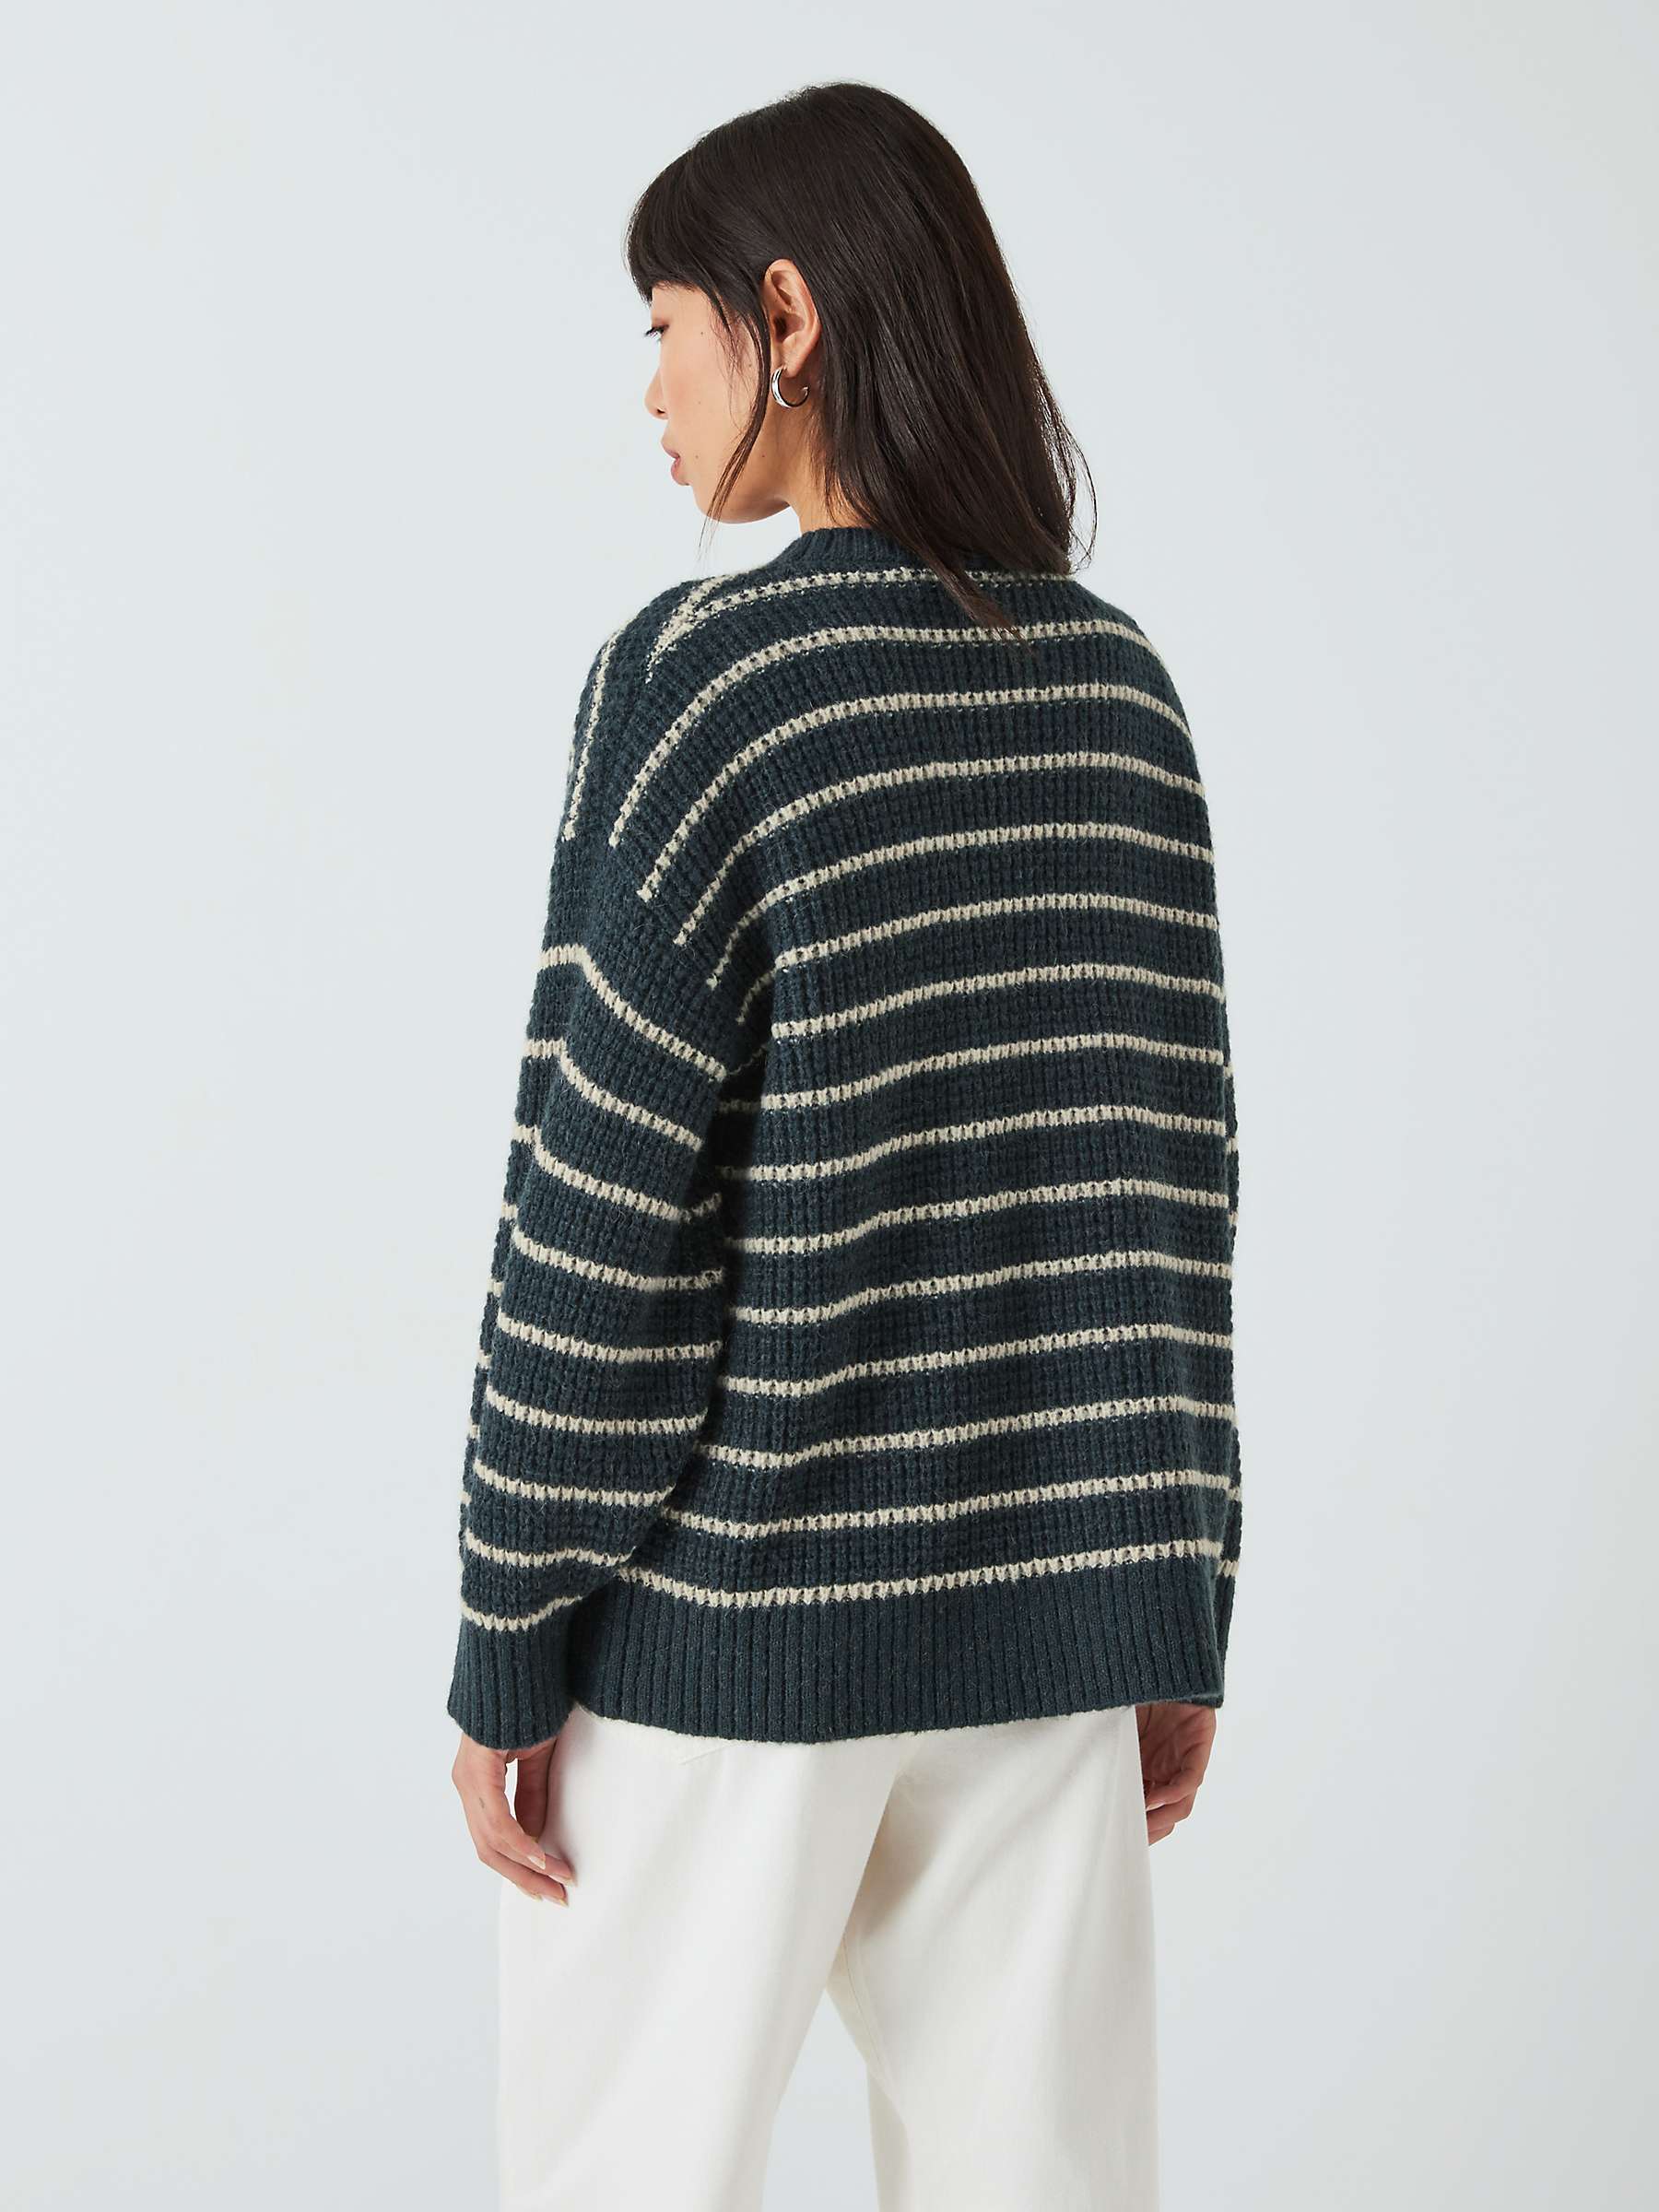 AND/OR Iris Oversized Stripe Jumper, Navy at John Lewis & Partners